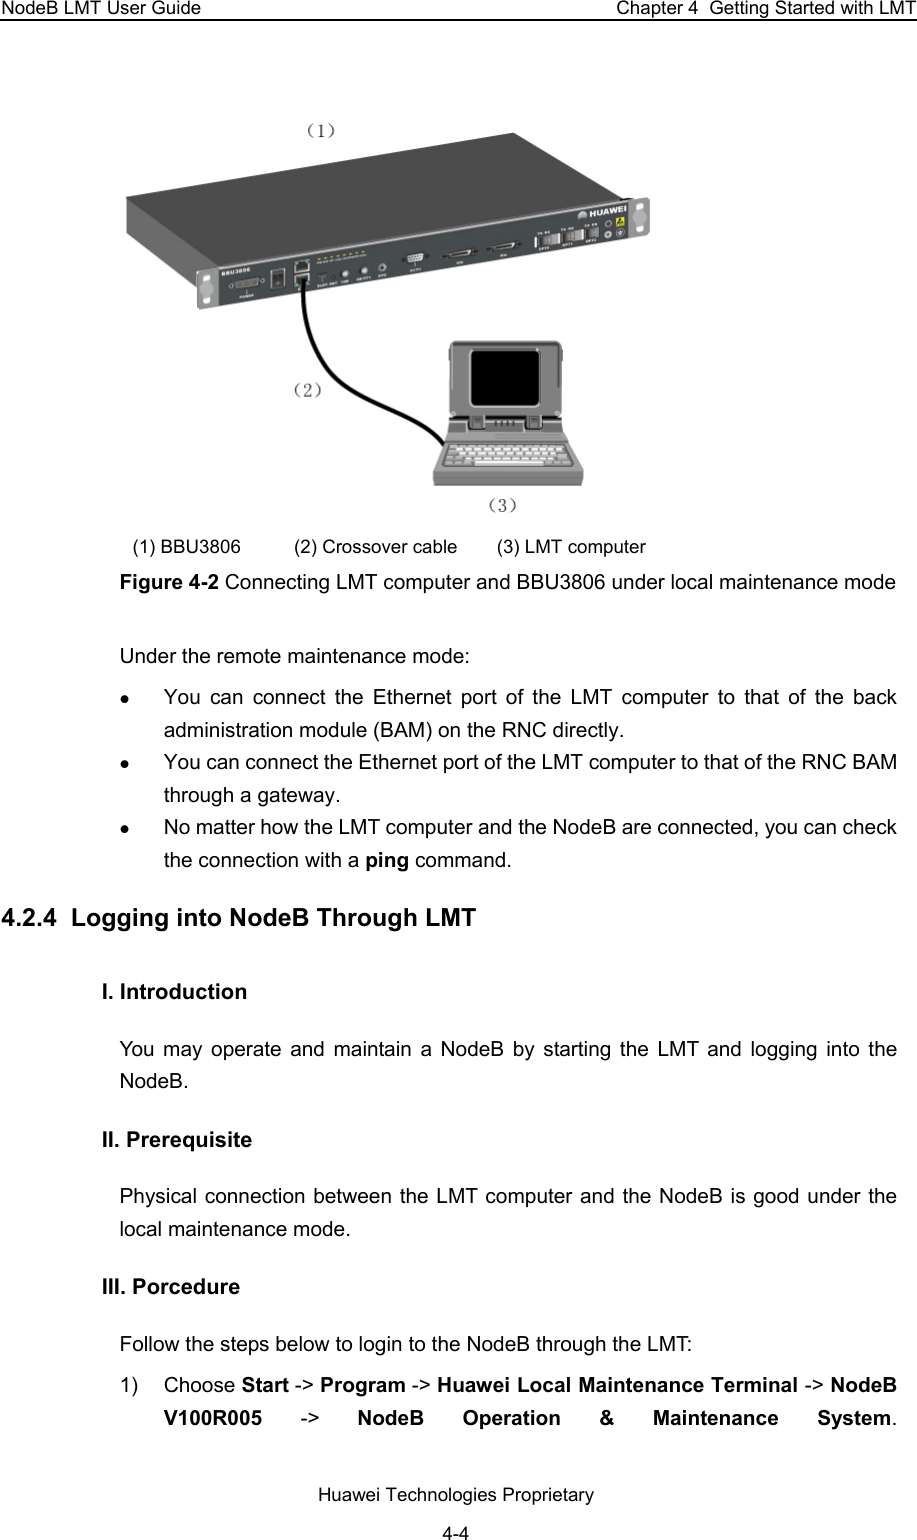 NodeB LMT User Guide  Chapter 4  Getting Started with LMT   (1) BBU3806  (2) Crossover cable   (3) LMT computer Figure 4-2 Connecting LMT computer and BBU3806 under local maintenance mode Under the remote maintenance mode:  z You can connect the Ethernet port of the LMT computer to that of the back administration module (BAM) on the RNC directly.  z You can connect the Ethernet port of the LMT computer to that of the RNC BAM through a gateway. z No matter how the LMT computer and the NodeB are connected, you can check the connection with a ping command.  4.2.4  Logging into NodeB Through LMT I. Introduction You may operate and maintain a NodeB by starting the LMT and logging into the NodeB.  II. Prerequisite Physical connection between the LMT computer and the NodeB is good under the local maintenance mode.  III. Porcedure  Follow the steps below to login to the NodeB through the LMT:  1) Choose Start -&gt; Program -&gt; Huawei Local Maintenance Terminal -&gt; NodeB V100R005  -&gt;  NodeB Operation &amp; Maintenance System.  Huawei Technologies Proprietary 4-4 